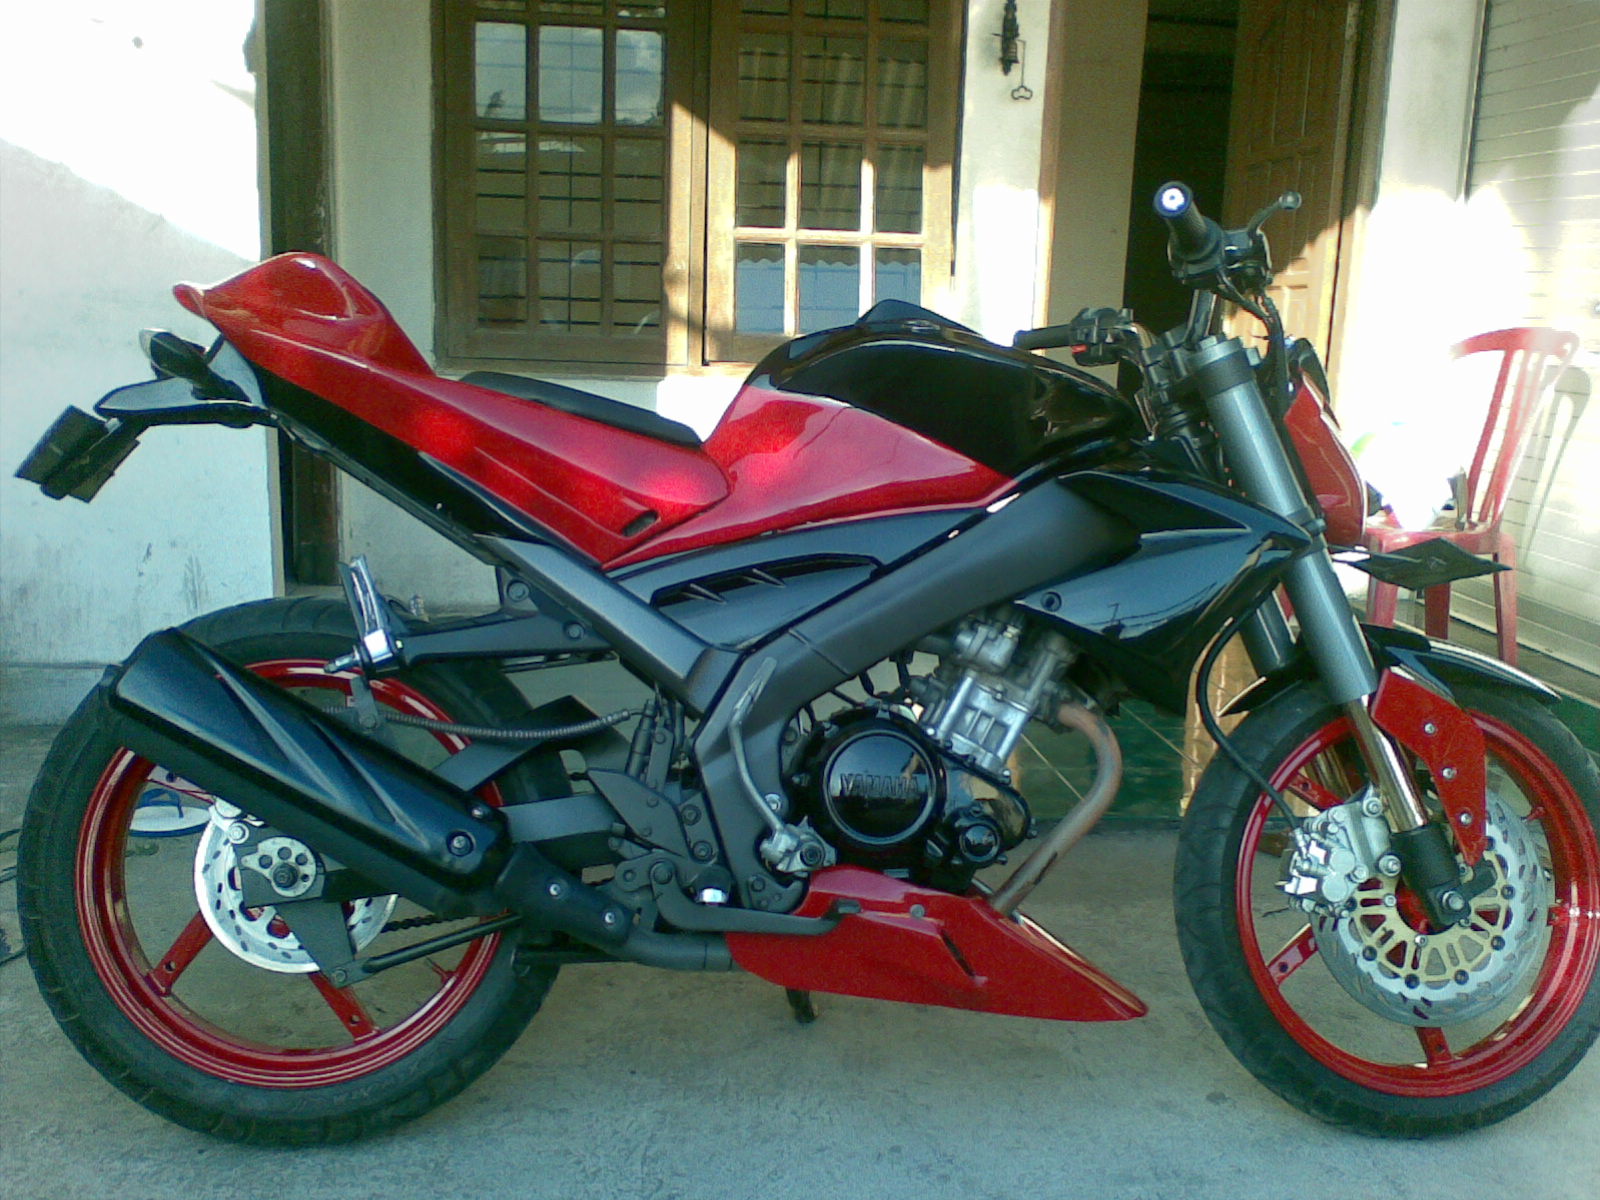 AND MODIFIKASI SYNDICATE: BODY STREET FIGHTER VIXION BY AND